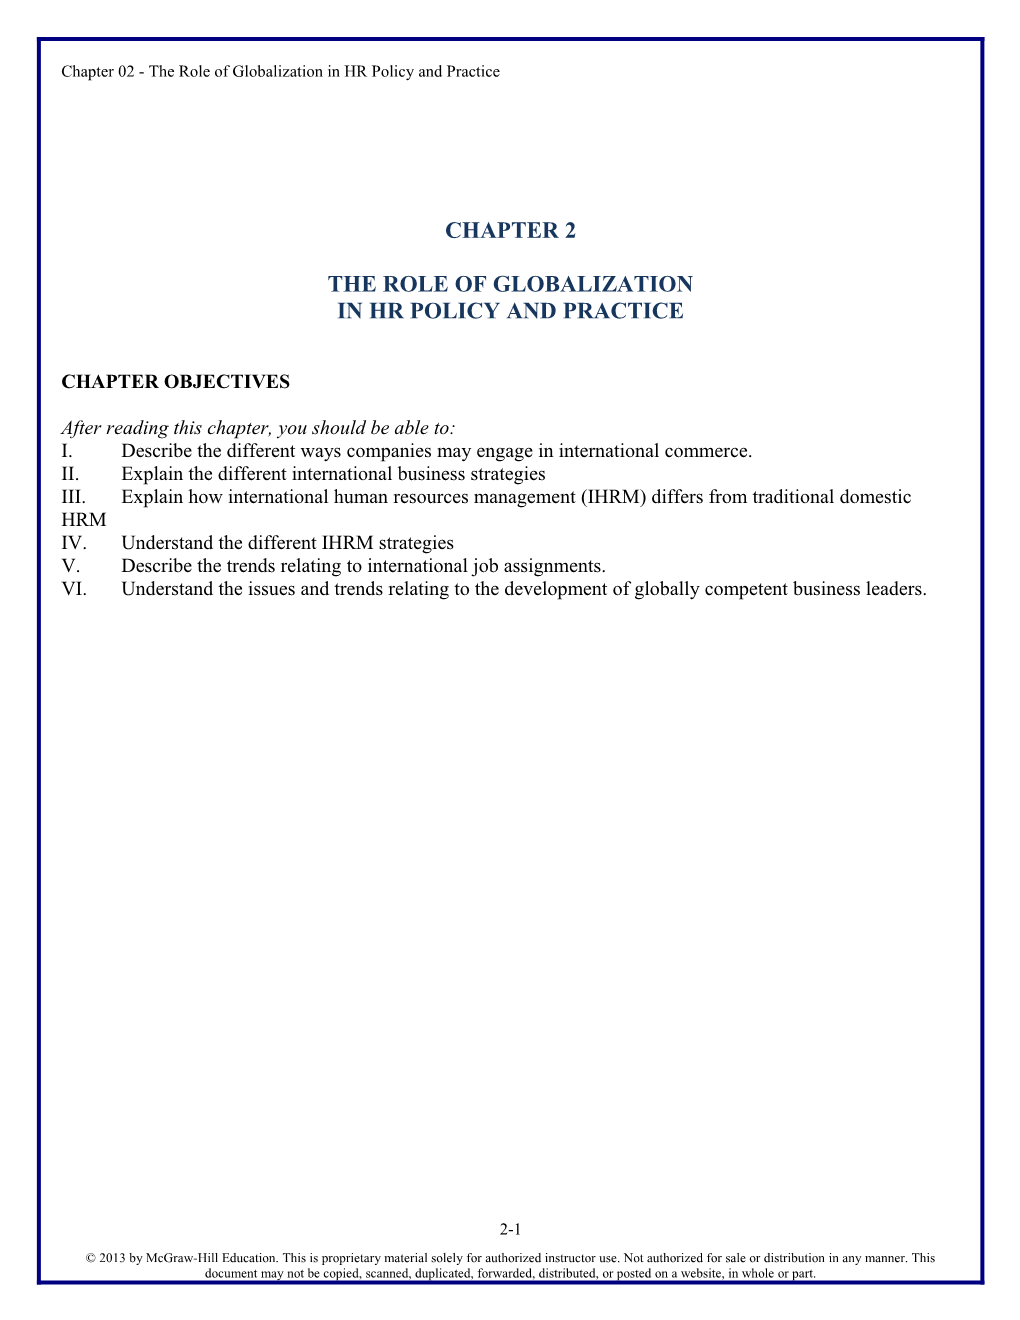 Chapter 02 - the Role of Globalization in HR Policy and Practice